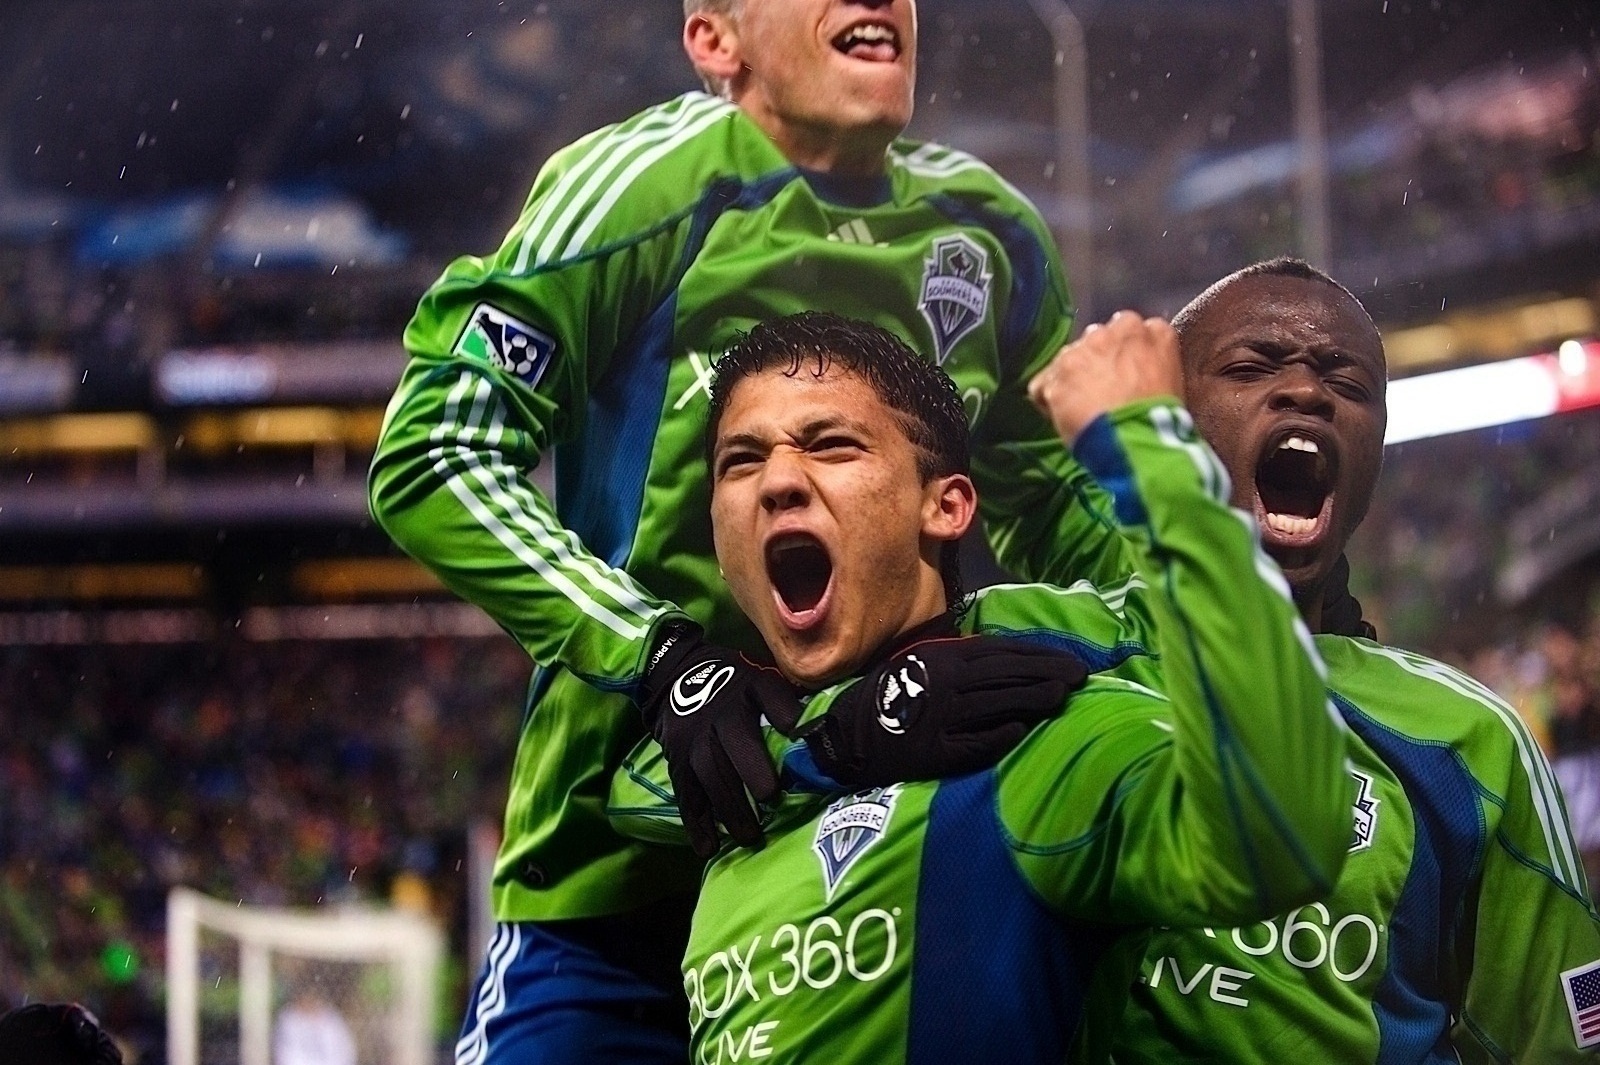 Seattle Sounders FC Pics, Sports Collection